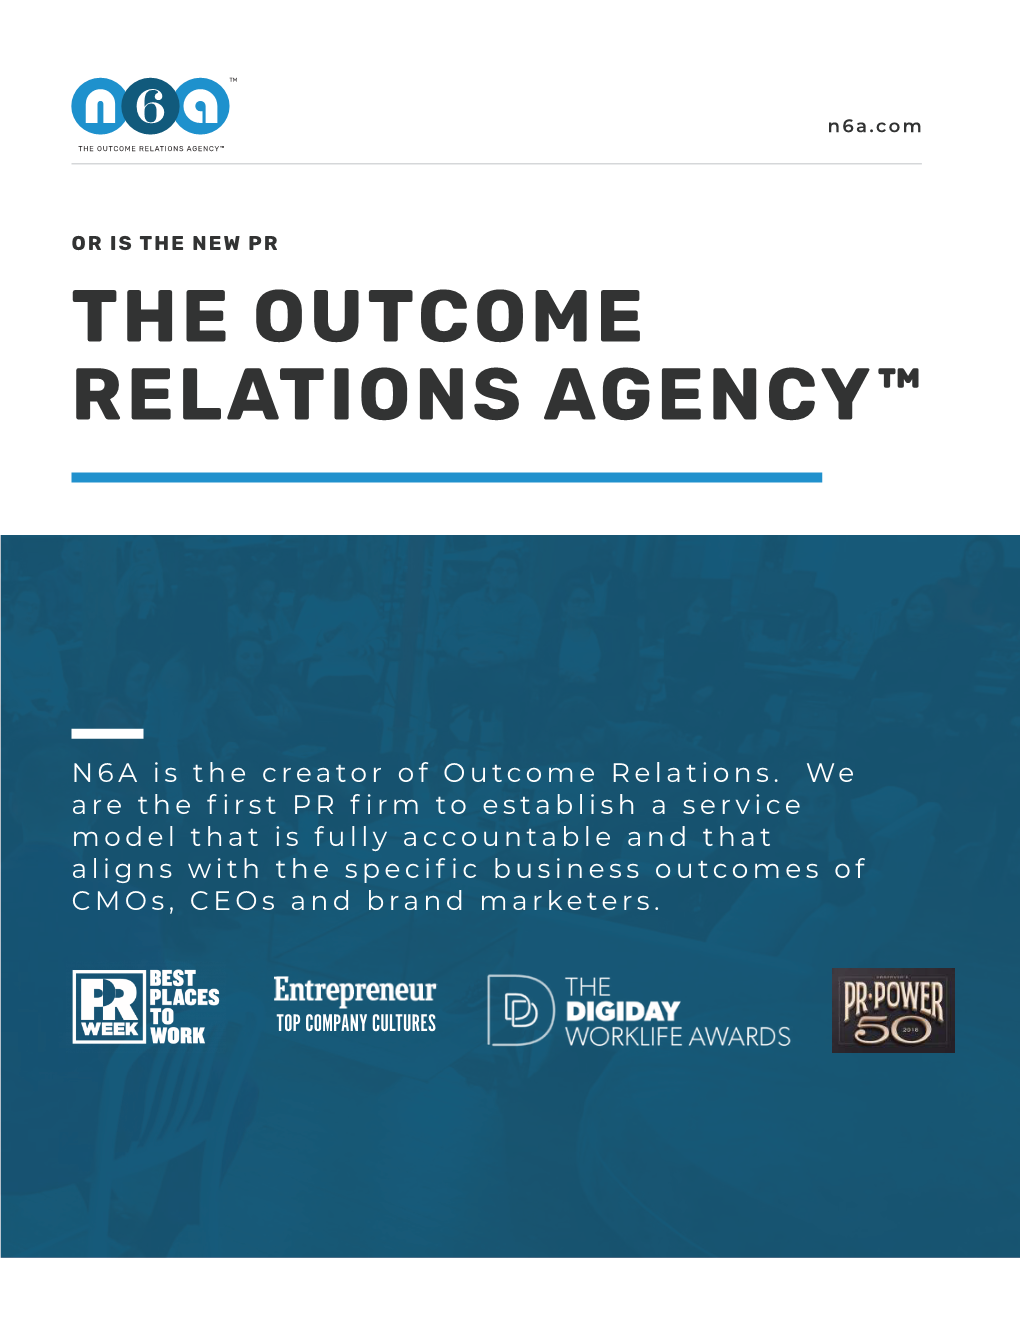 The Outcome Relations Agency™